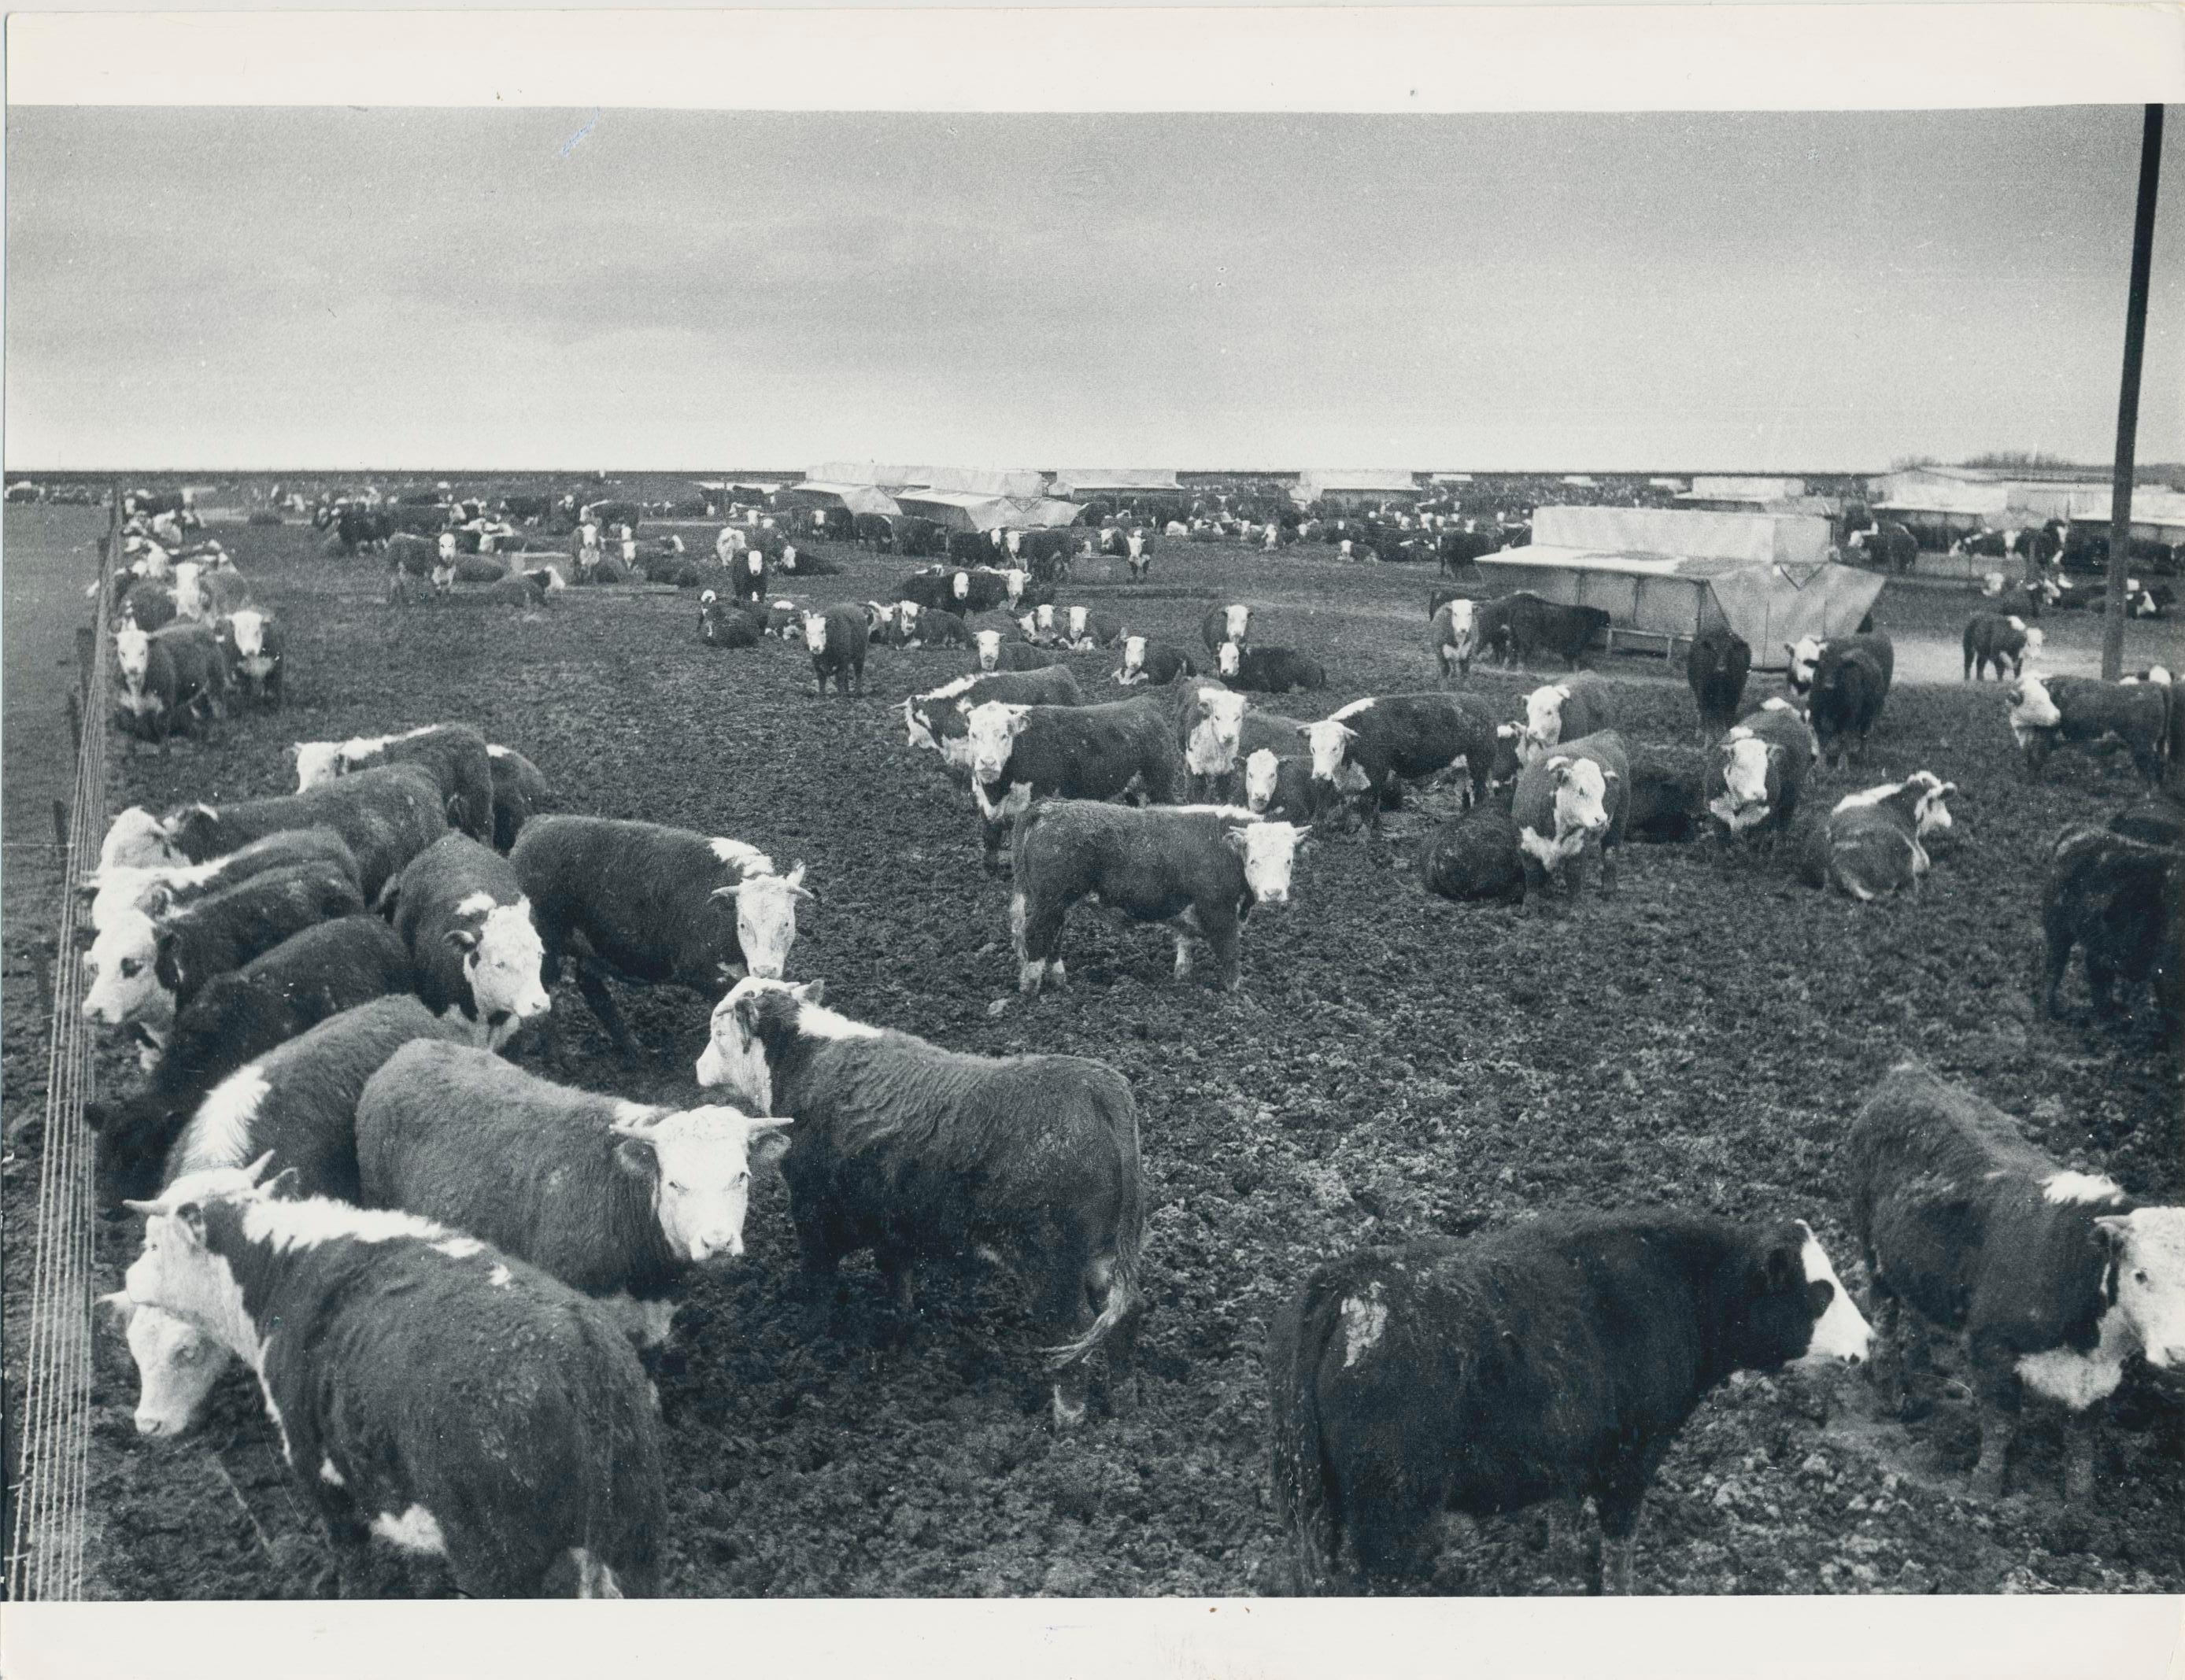 Cows, Farm, Texas, Black and White Photography, USA, 1960, 18, 2 x 23, 5 cm - Art by Erich Andres